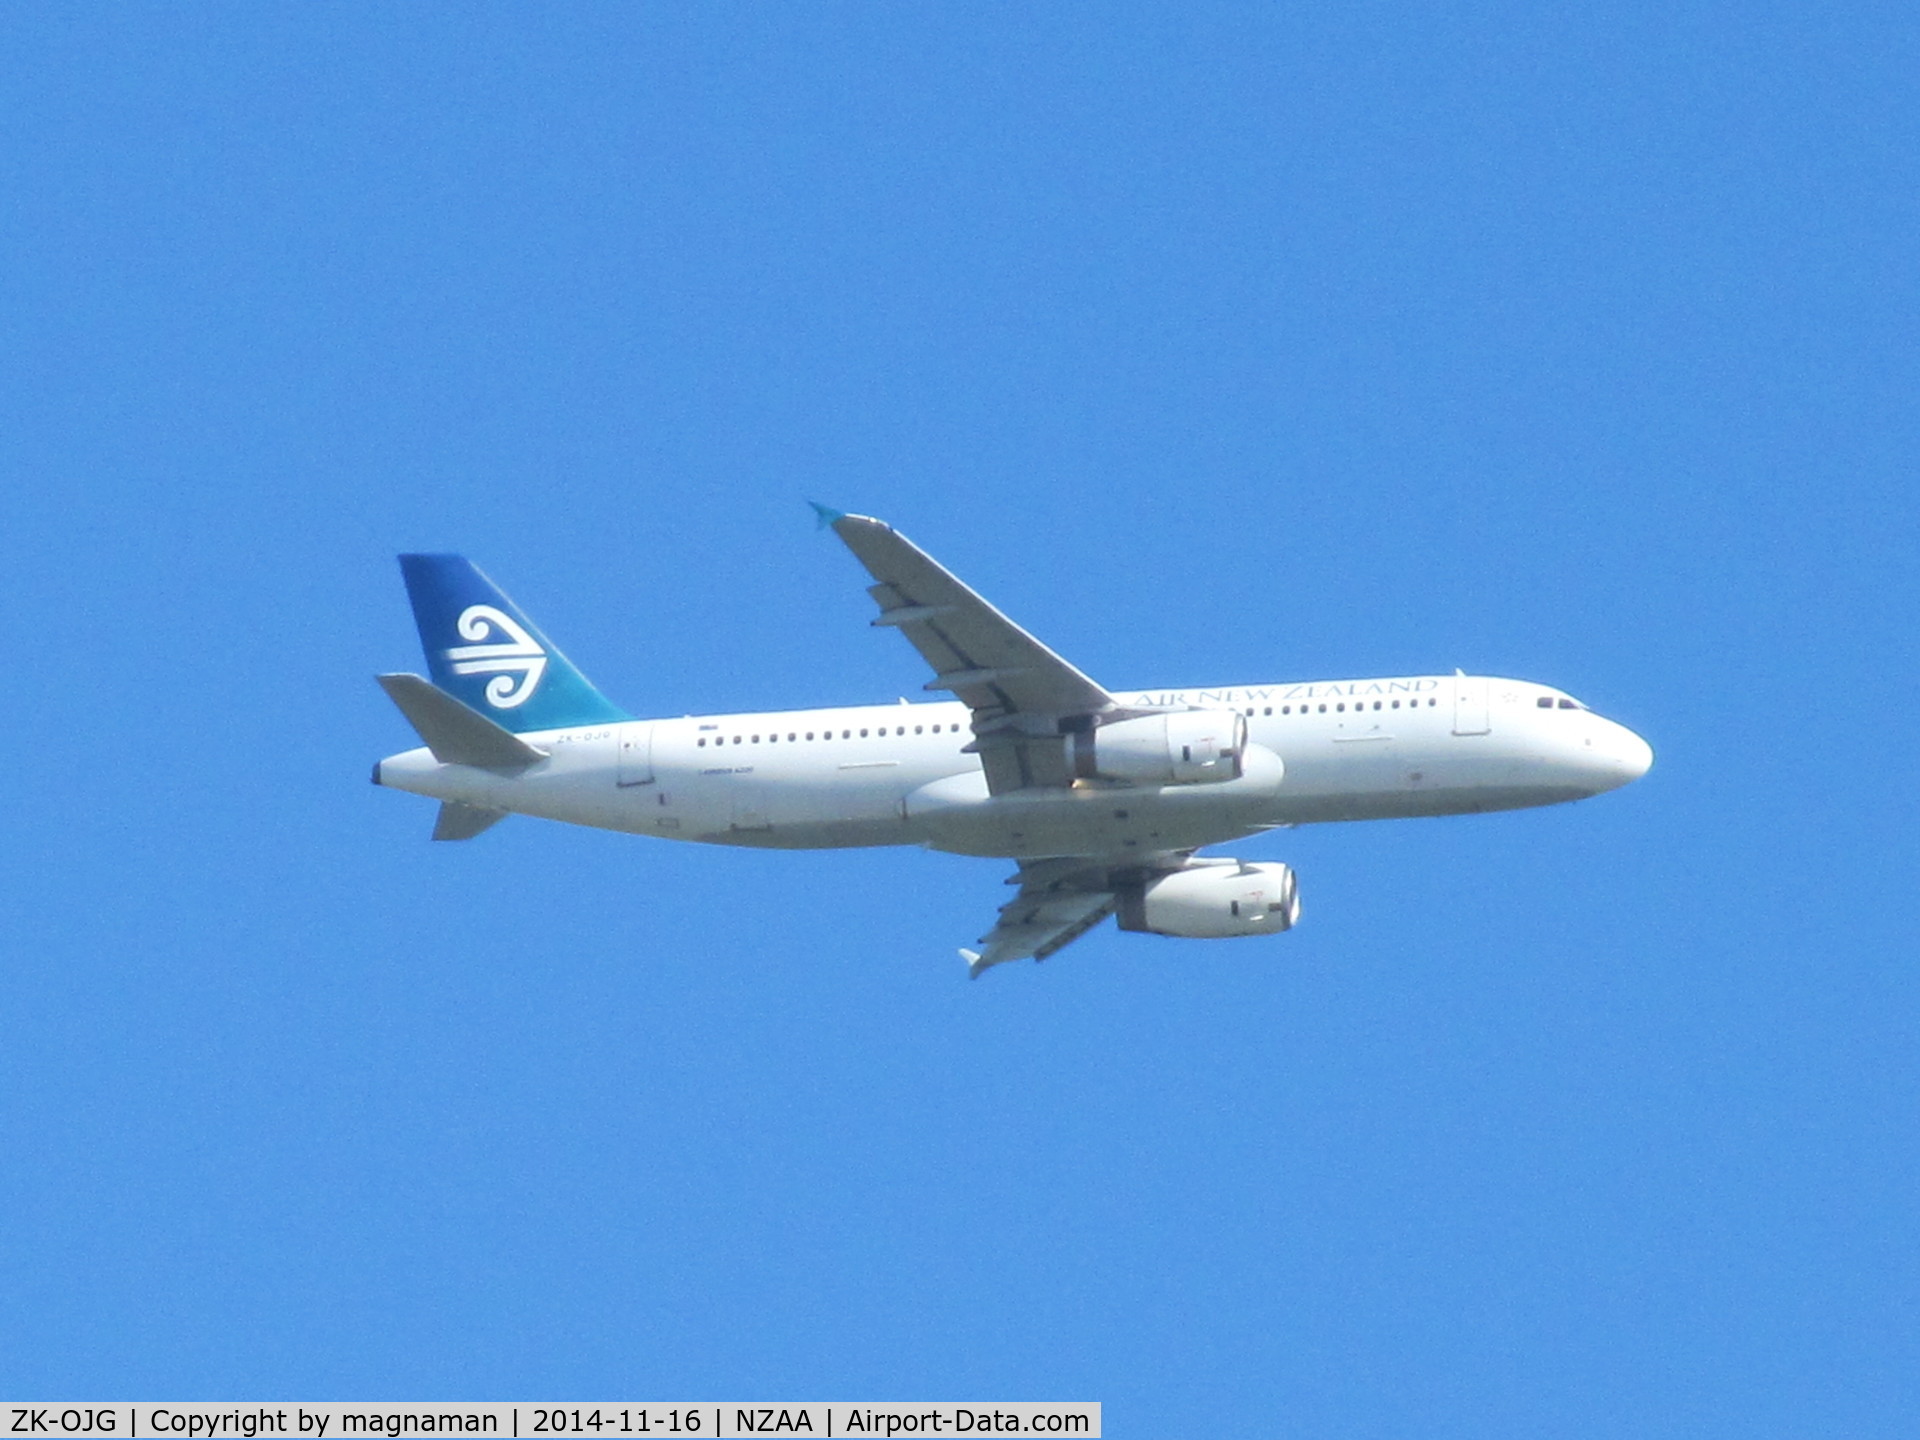 ZK-OJG, 2004 Airbus A320-232 C/N 2173, on finals to NZAA